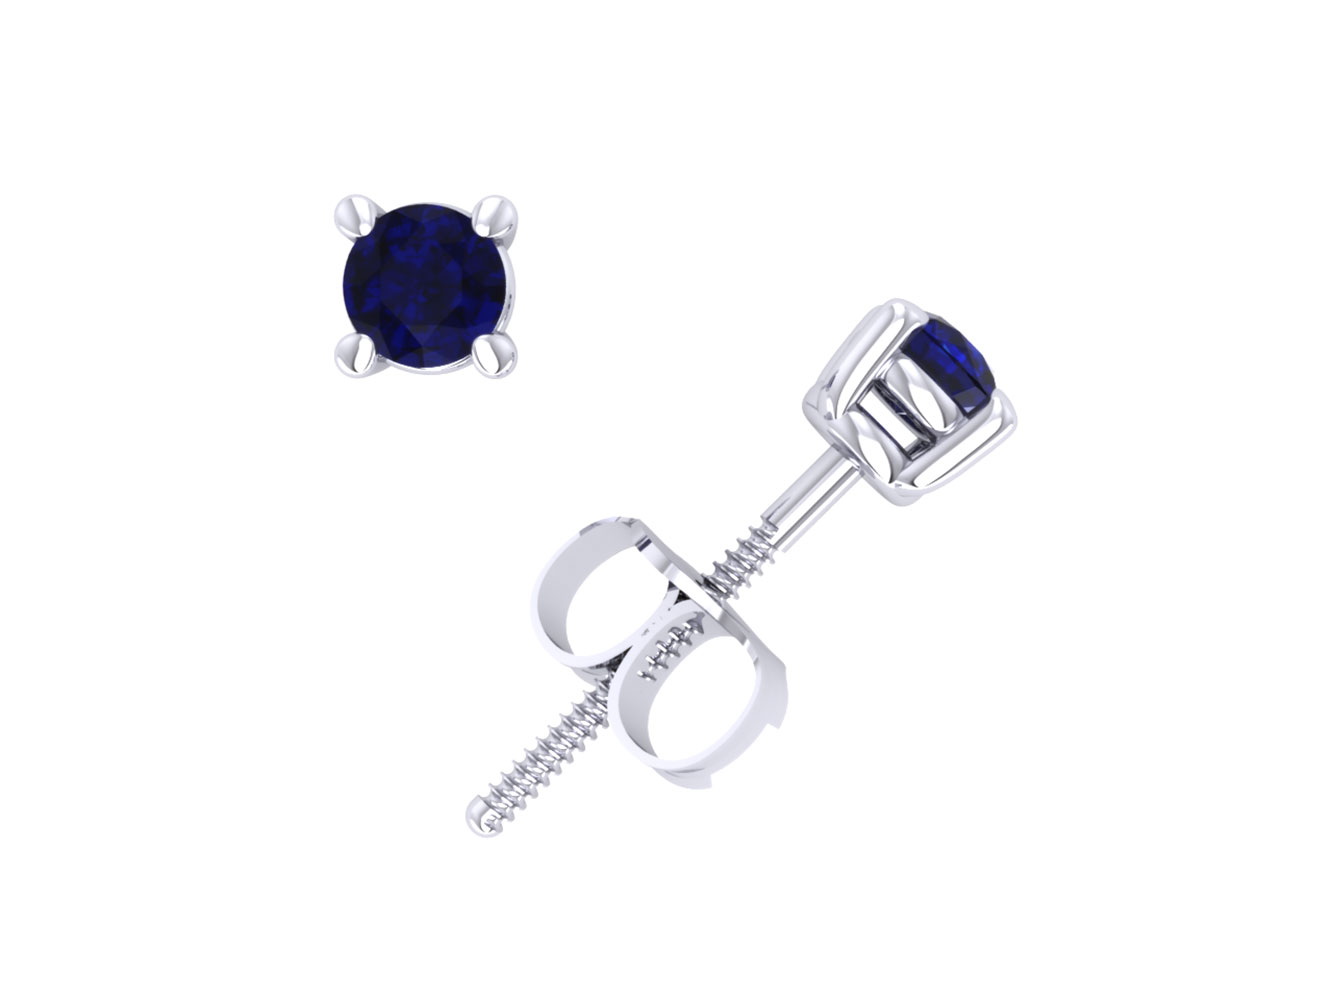 Jewel We Sell 0.15Carat Round Cut Blue Sapphire Basket Solitaire Stud Earrings 14k White or Yellow Gold Prong Commercial Quality